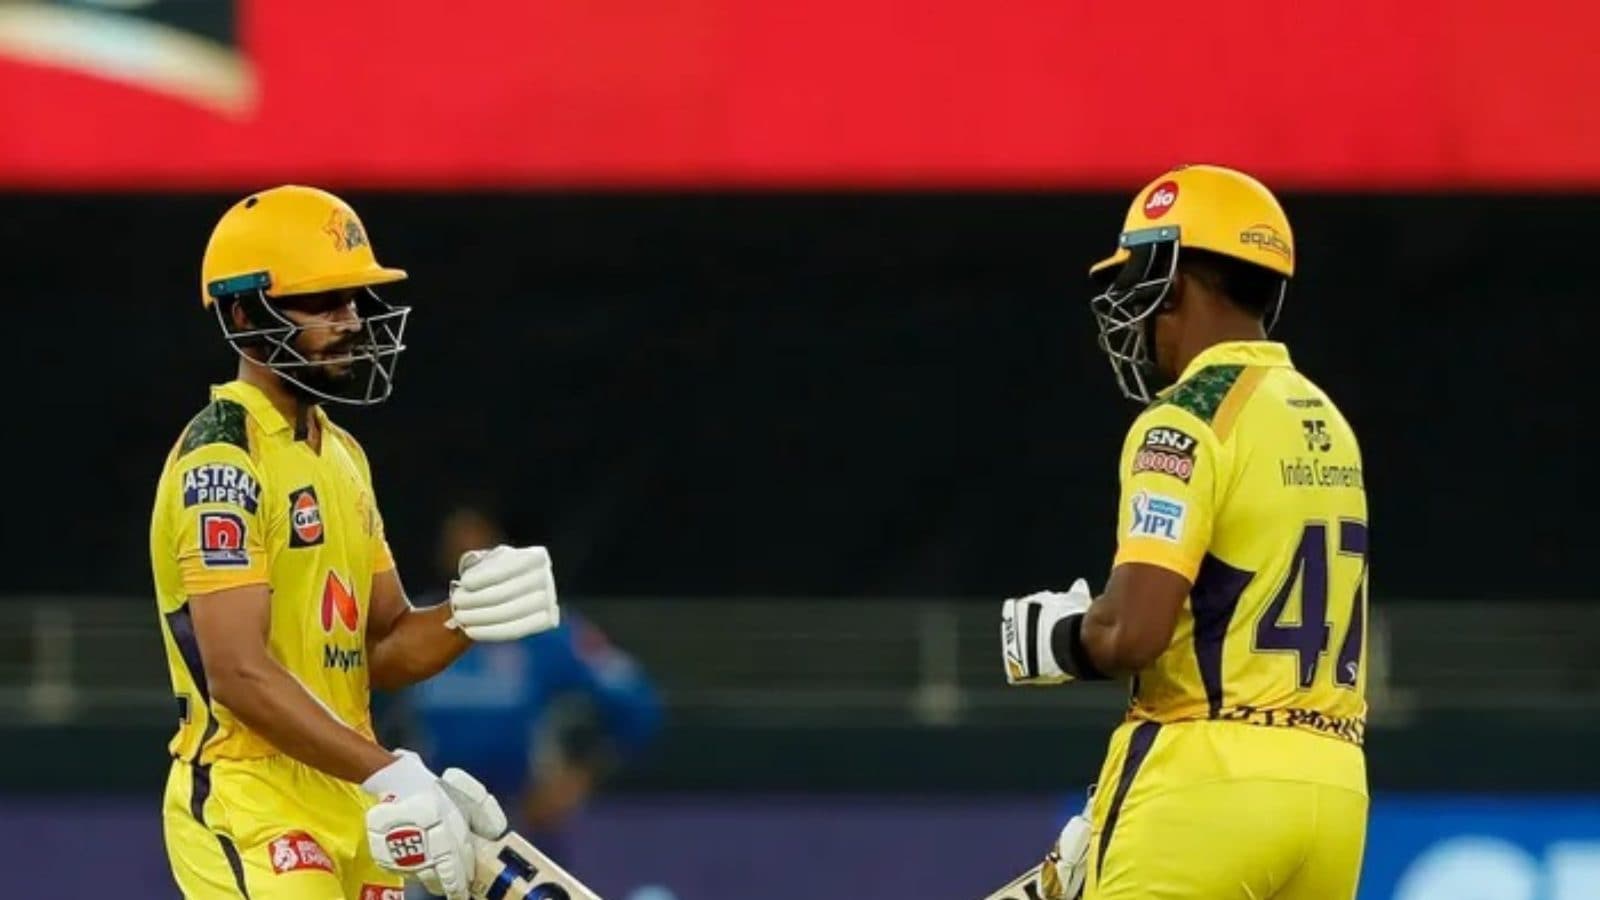 There is no stopping this MS Dhoni team in the Indian Premier League: IPL 2021